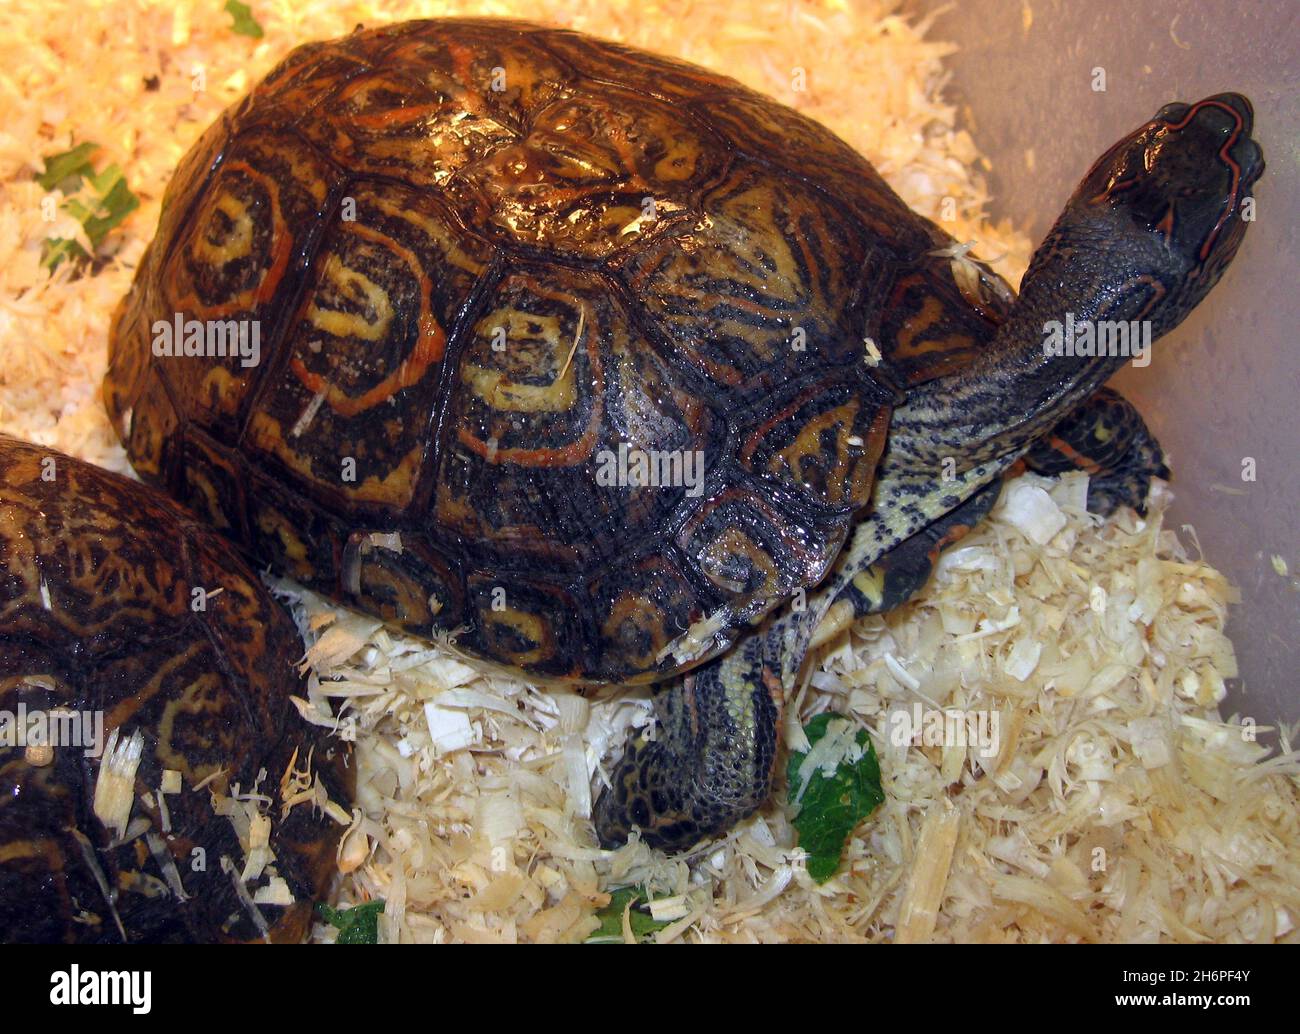 The ornate or painted or mexican wood turtle (Rhinoclemmys pulcherrima) Stock Photo